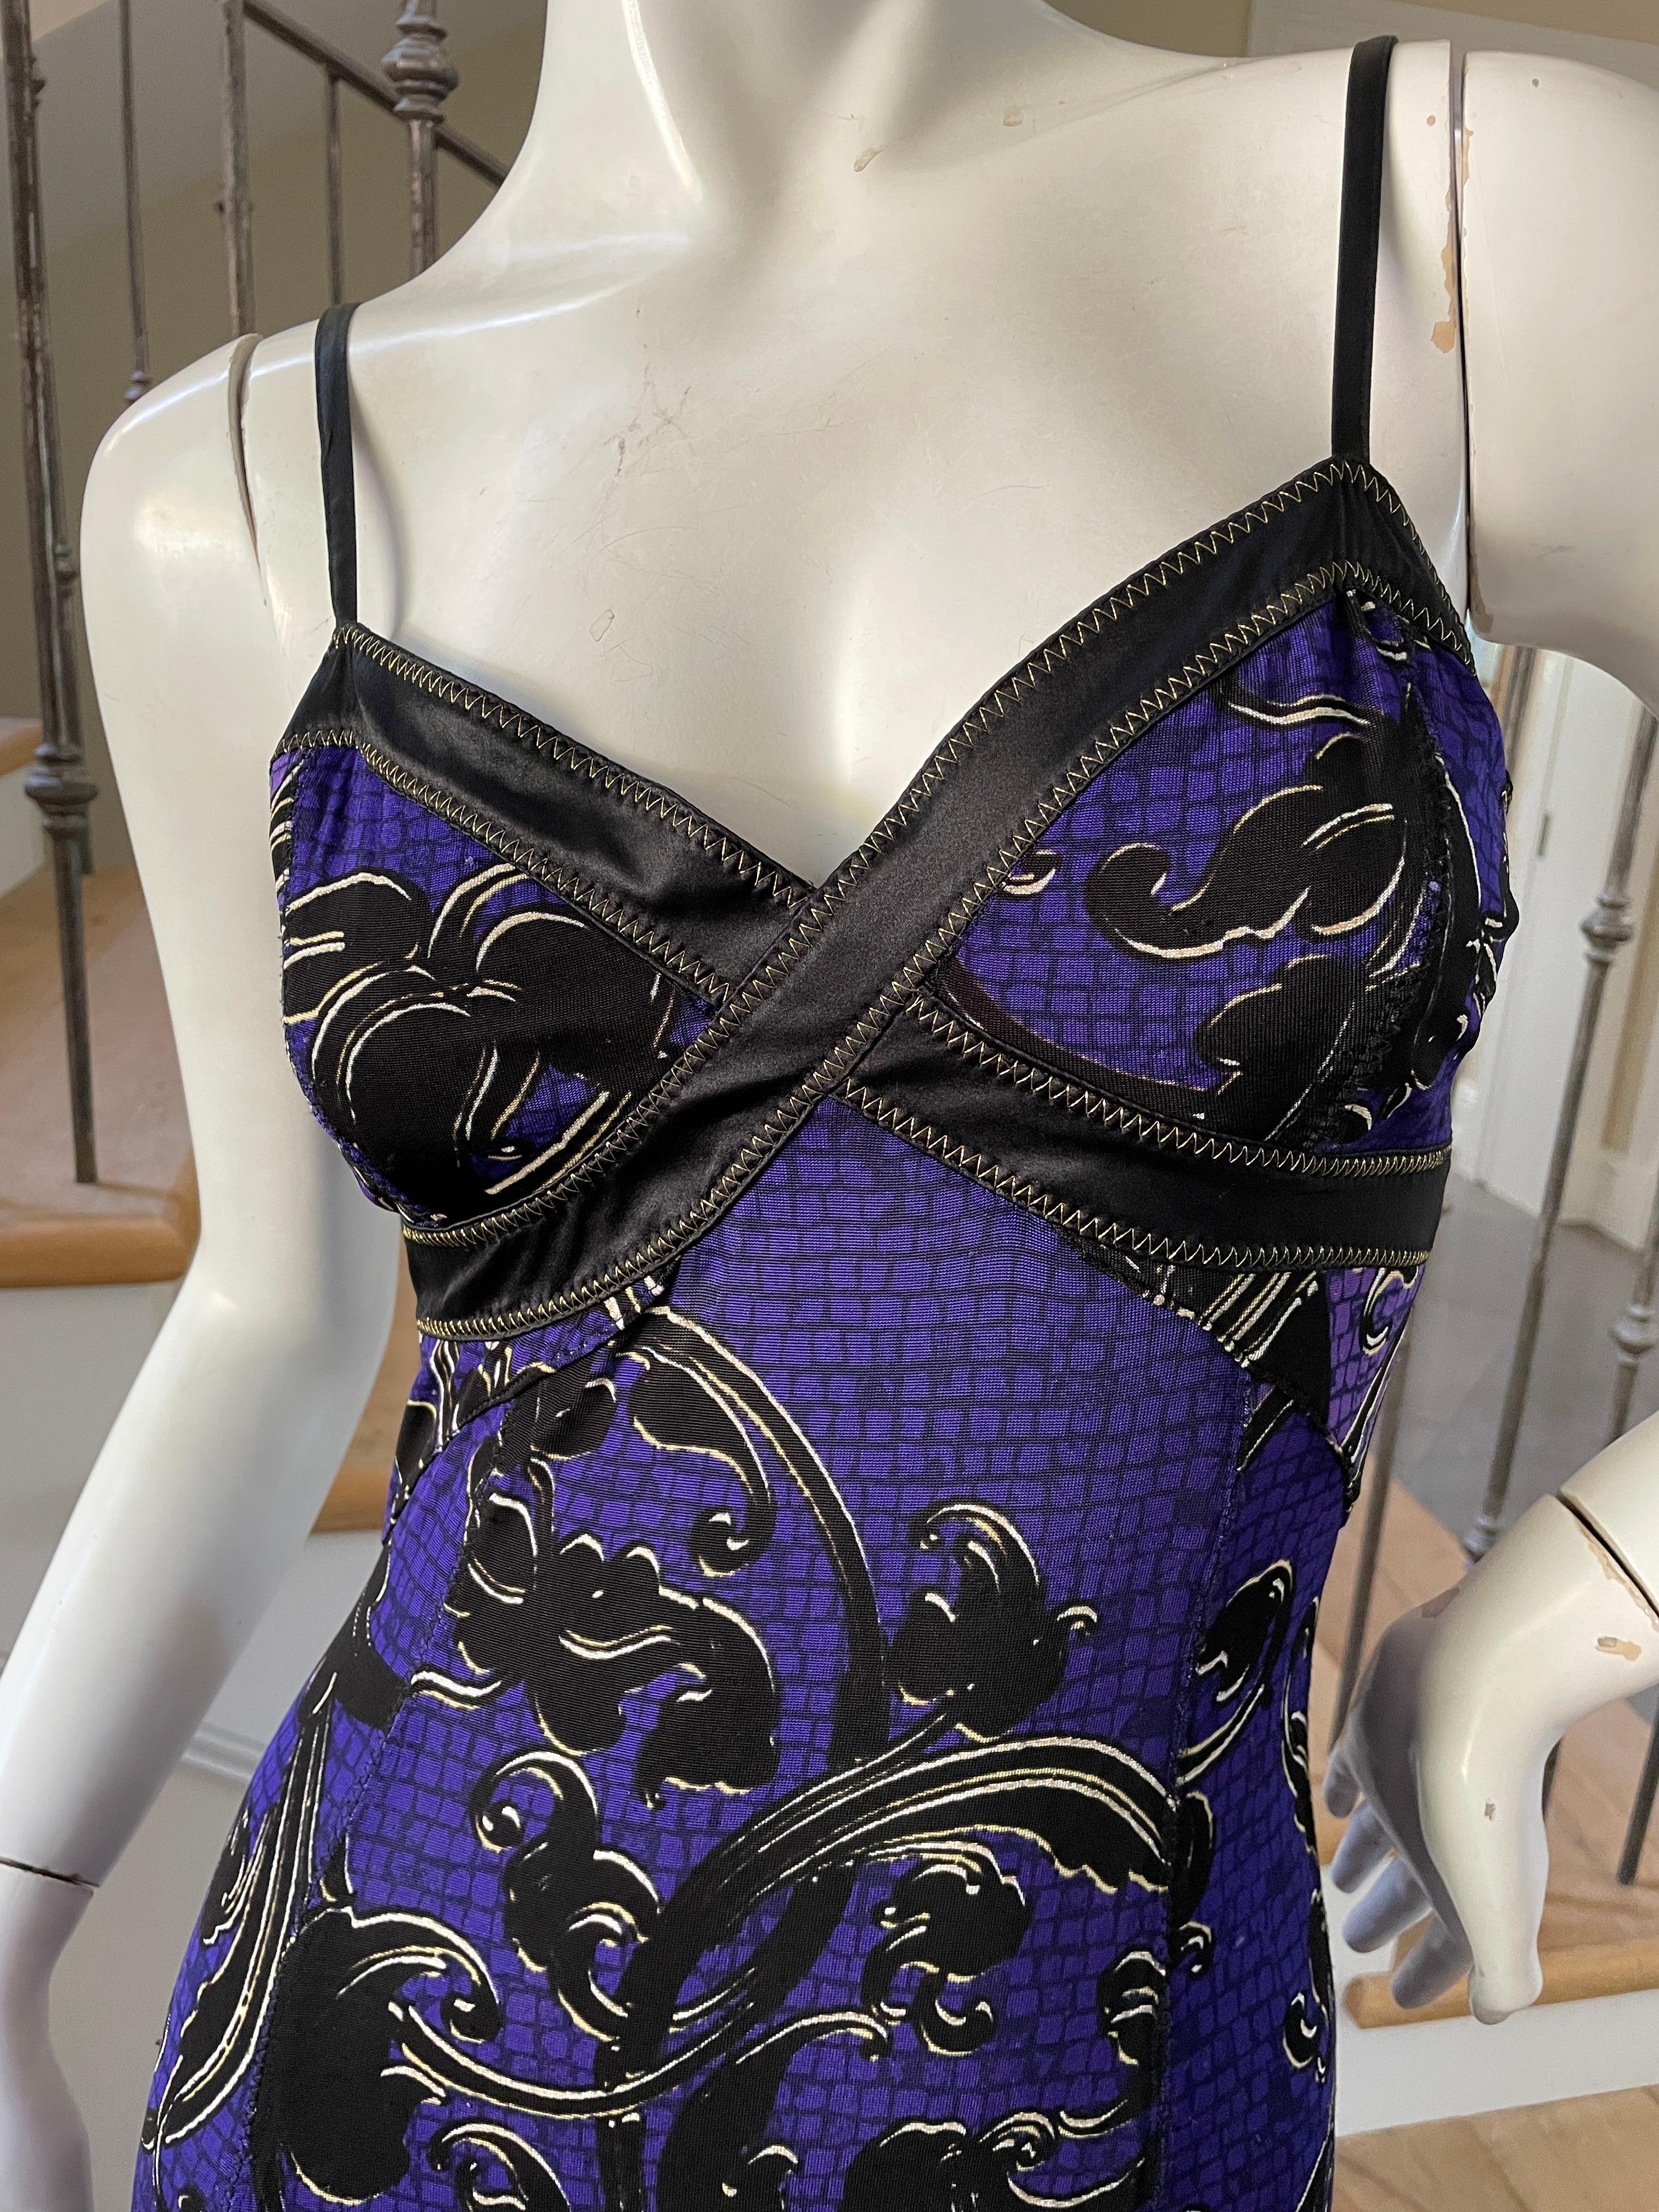 Roberto Cavalli for Just Cavalli Purple Flounce Hem Dress with Gold Stitching In Excellent Condition For Sale In Cloverdale, CA